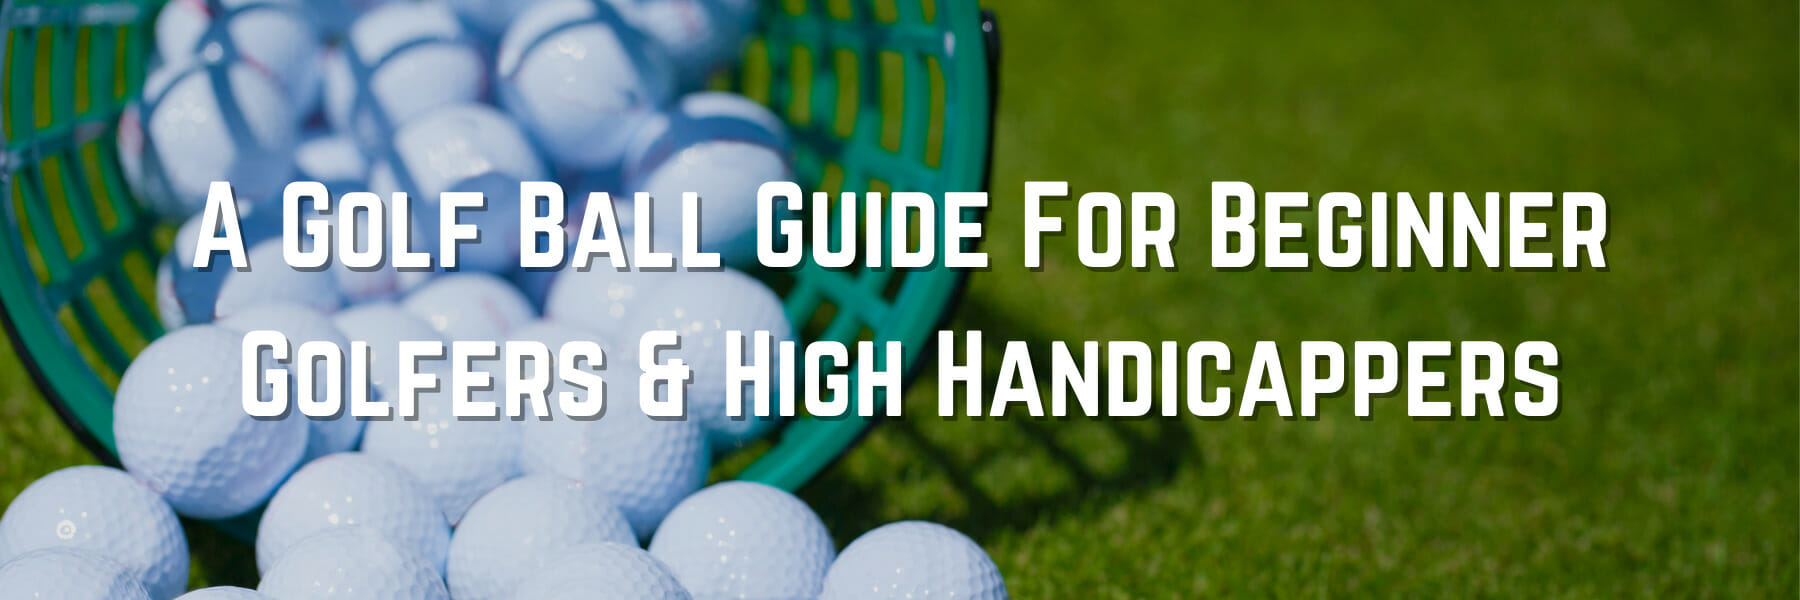 A Complete Guide To Golf Balls For Beginner Golfers & High Handicappers